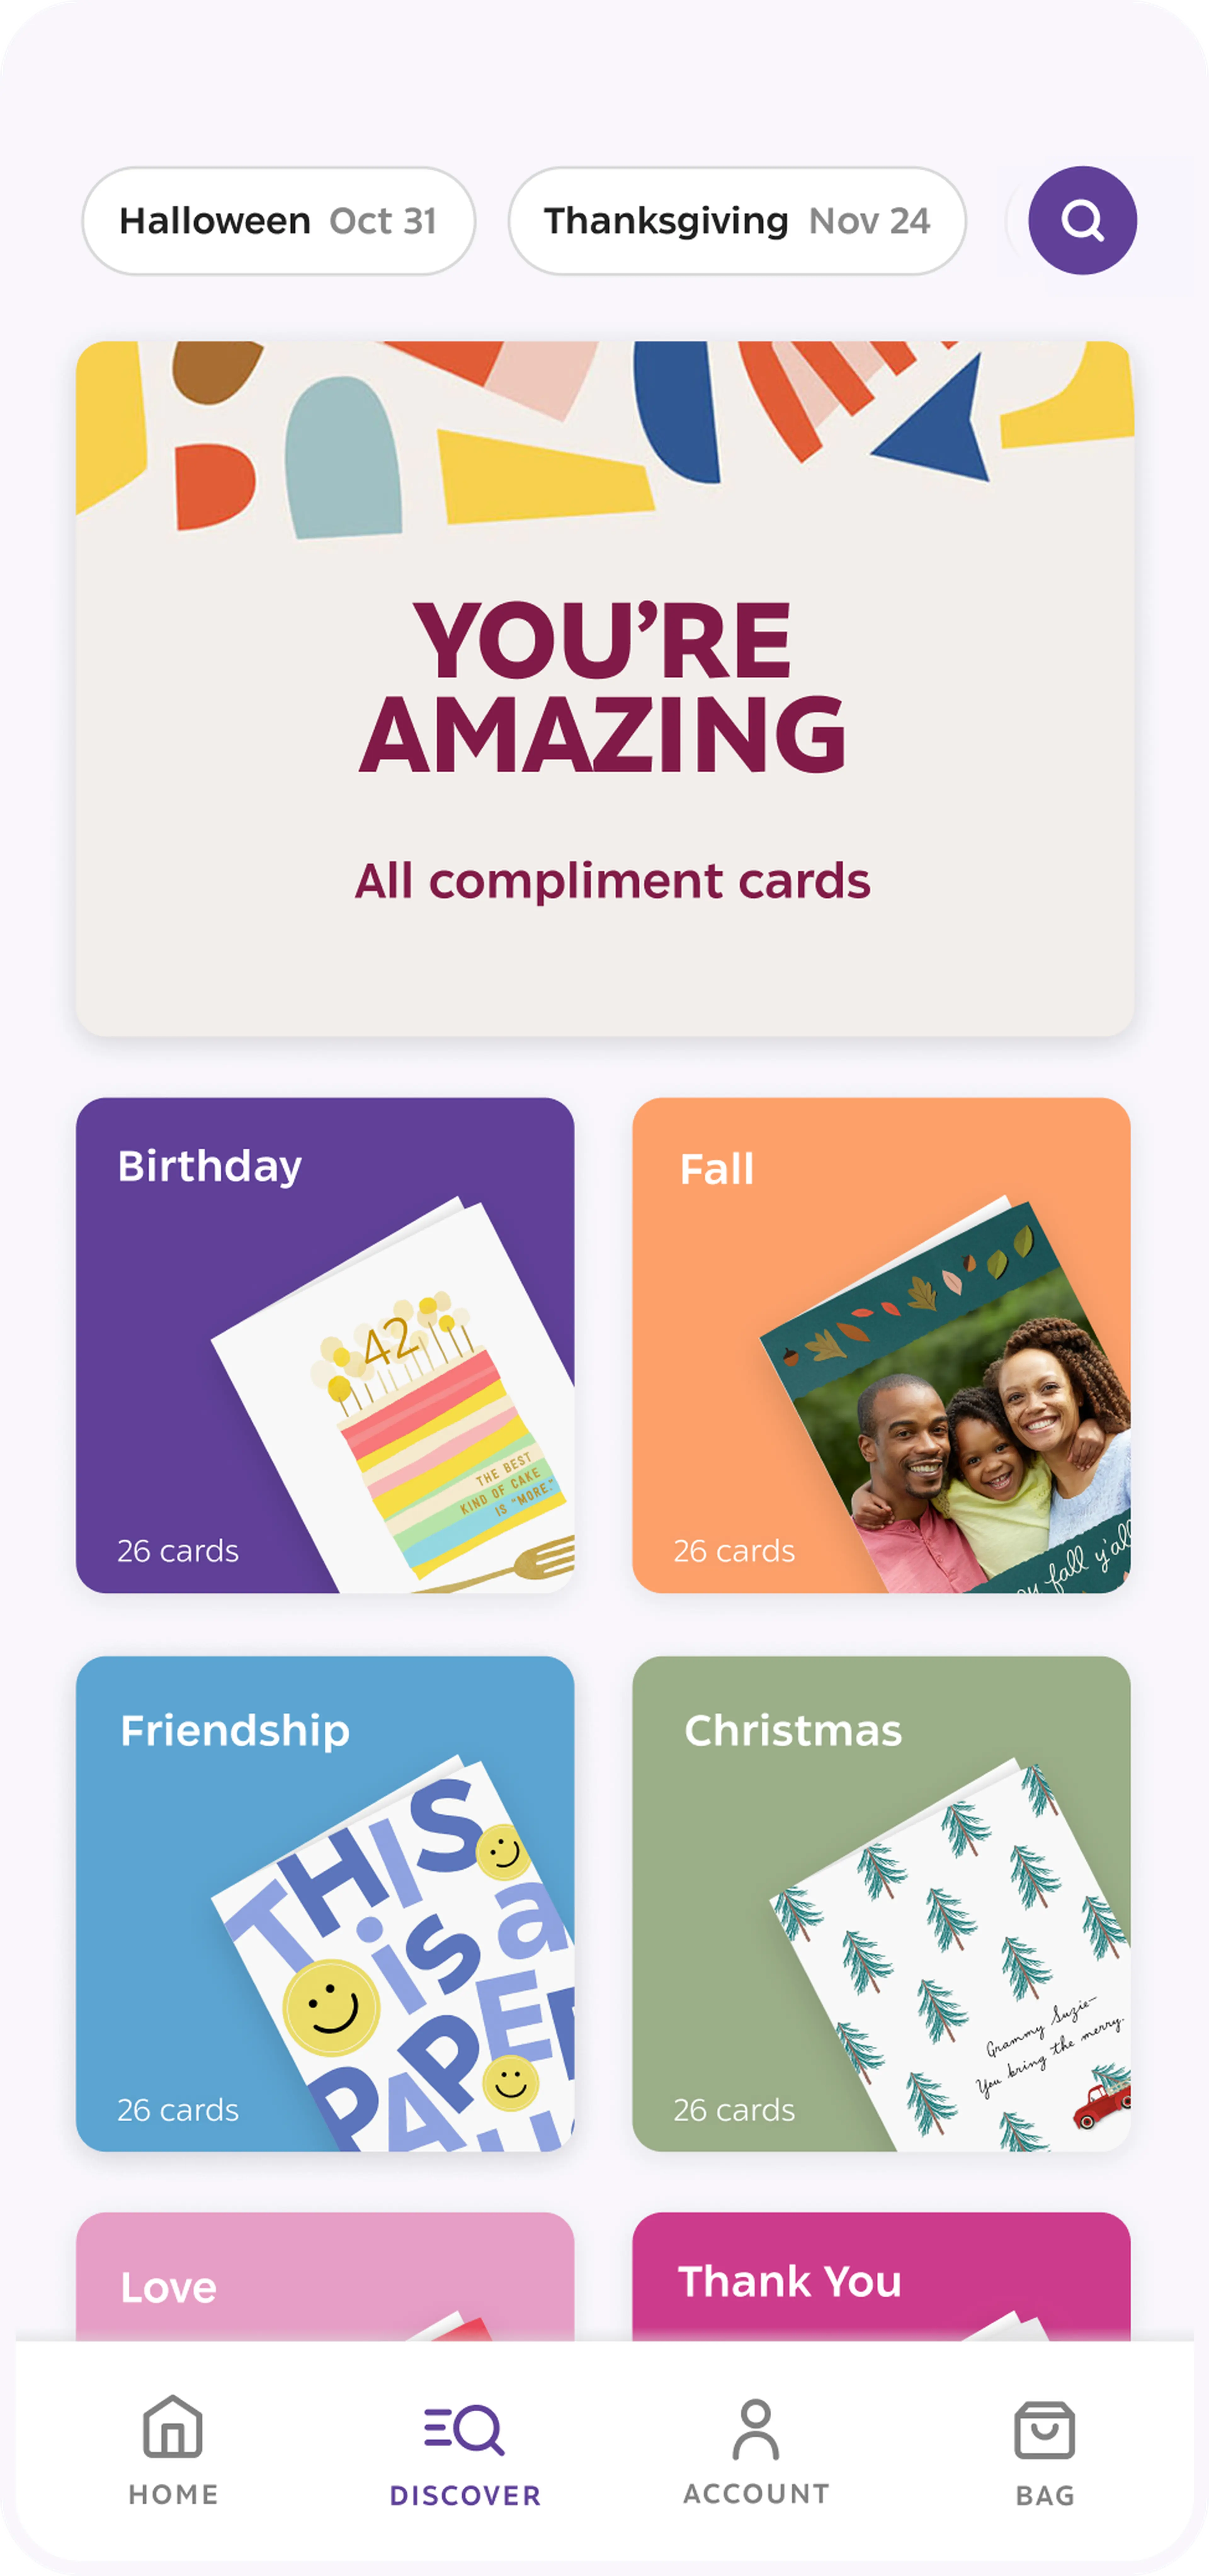 Design of the discover page of the hallmark app